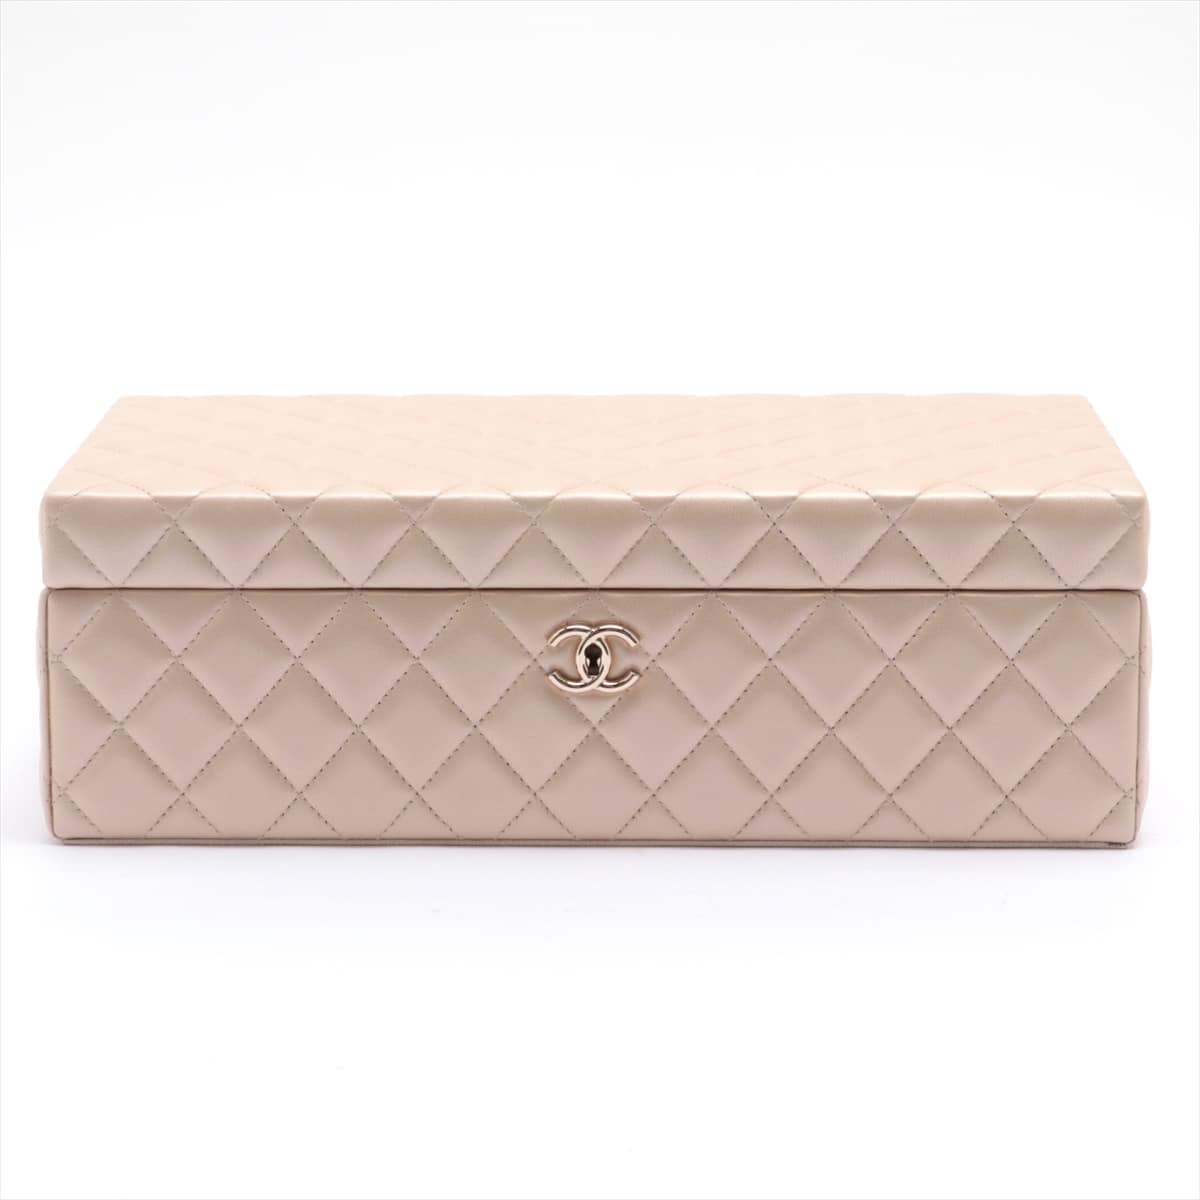 Chanel Matelasse Lambskin Jewelry case Champagne Gold Gold Metal fittings 22XXXXXX With a key